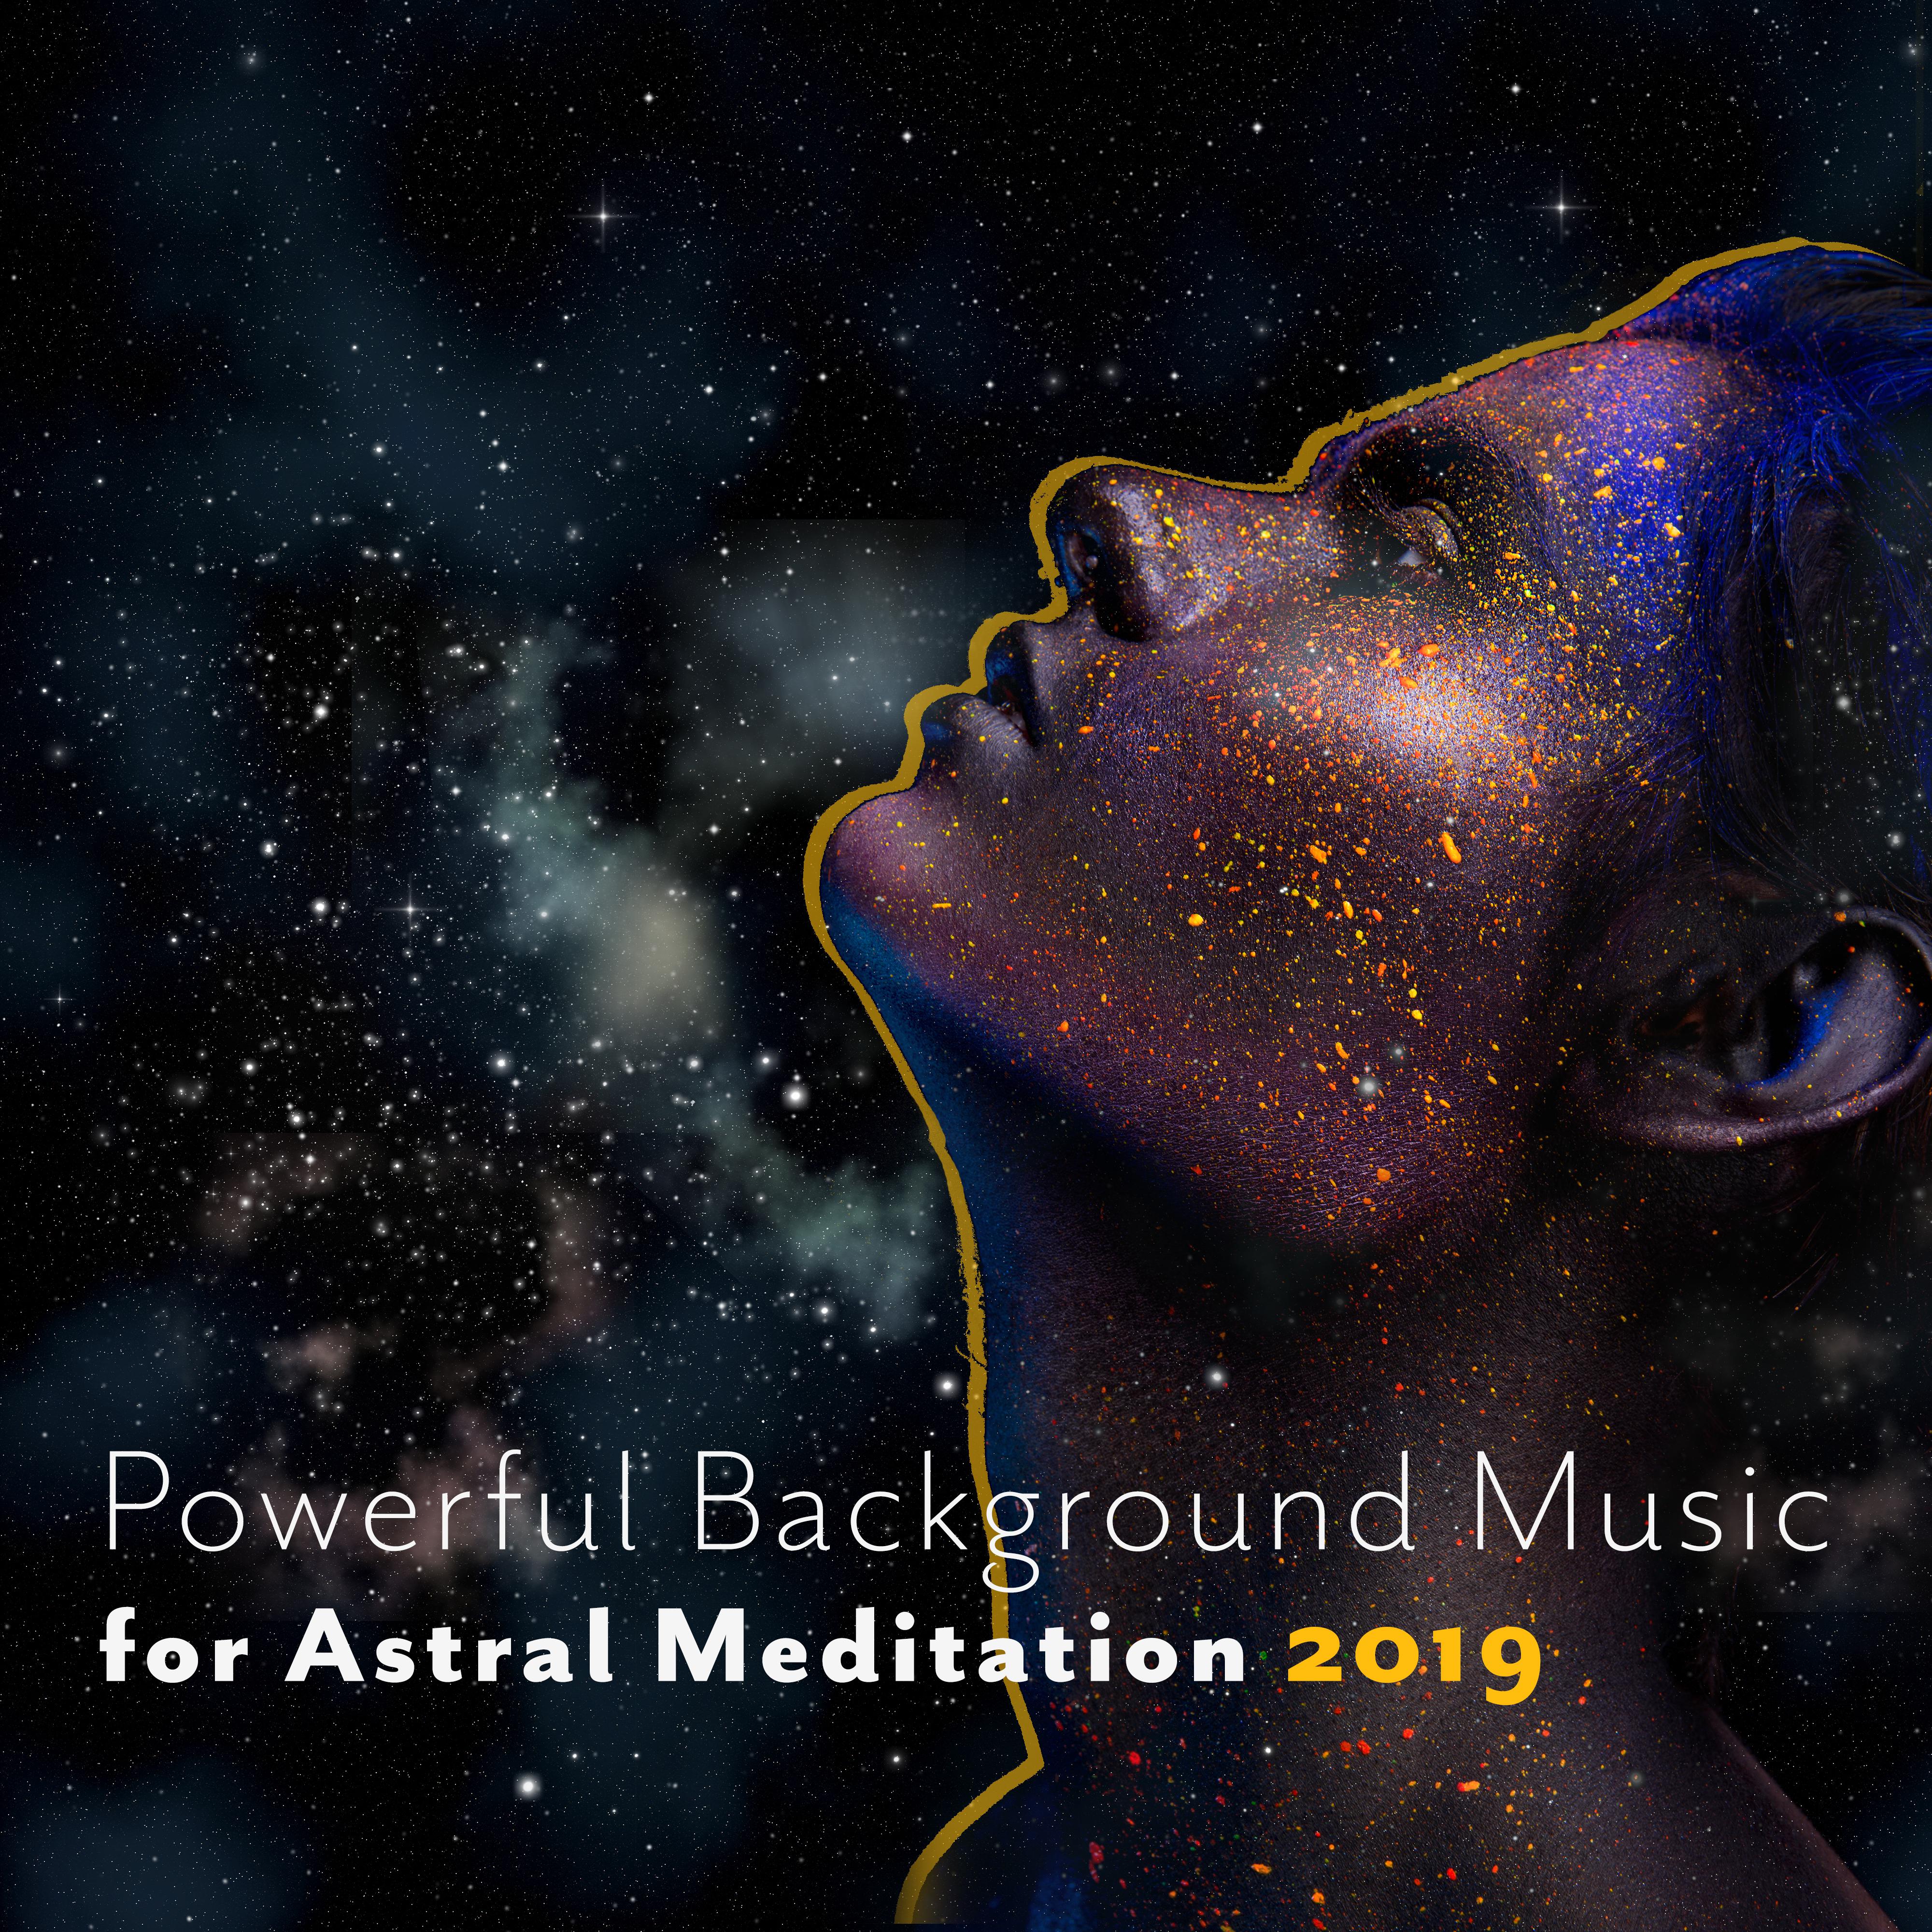 Powerful Background Music for Astral Meditation 2019